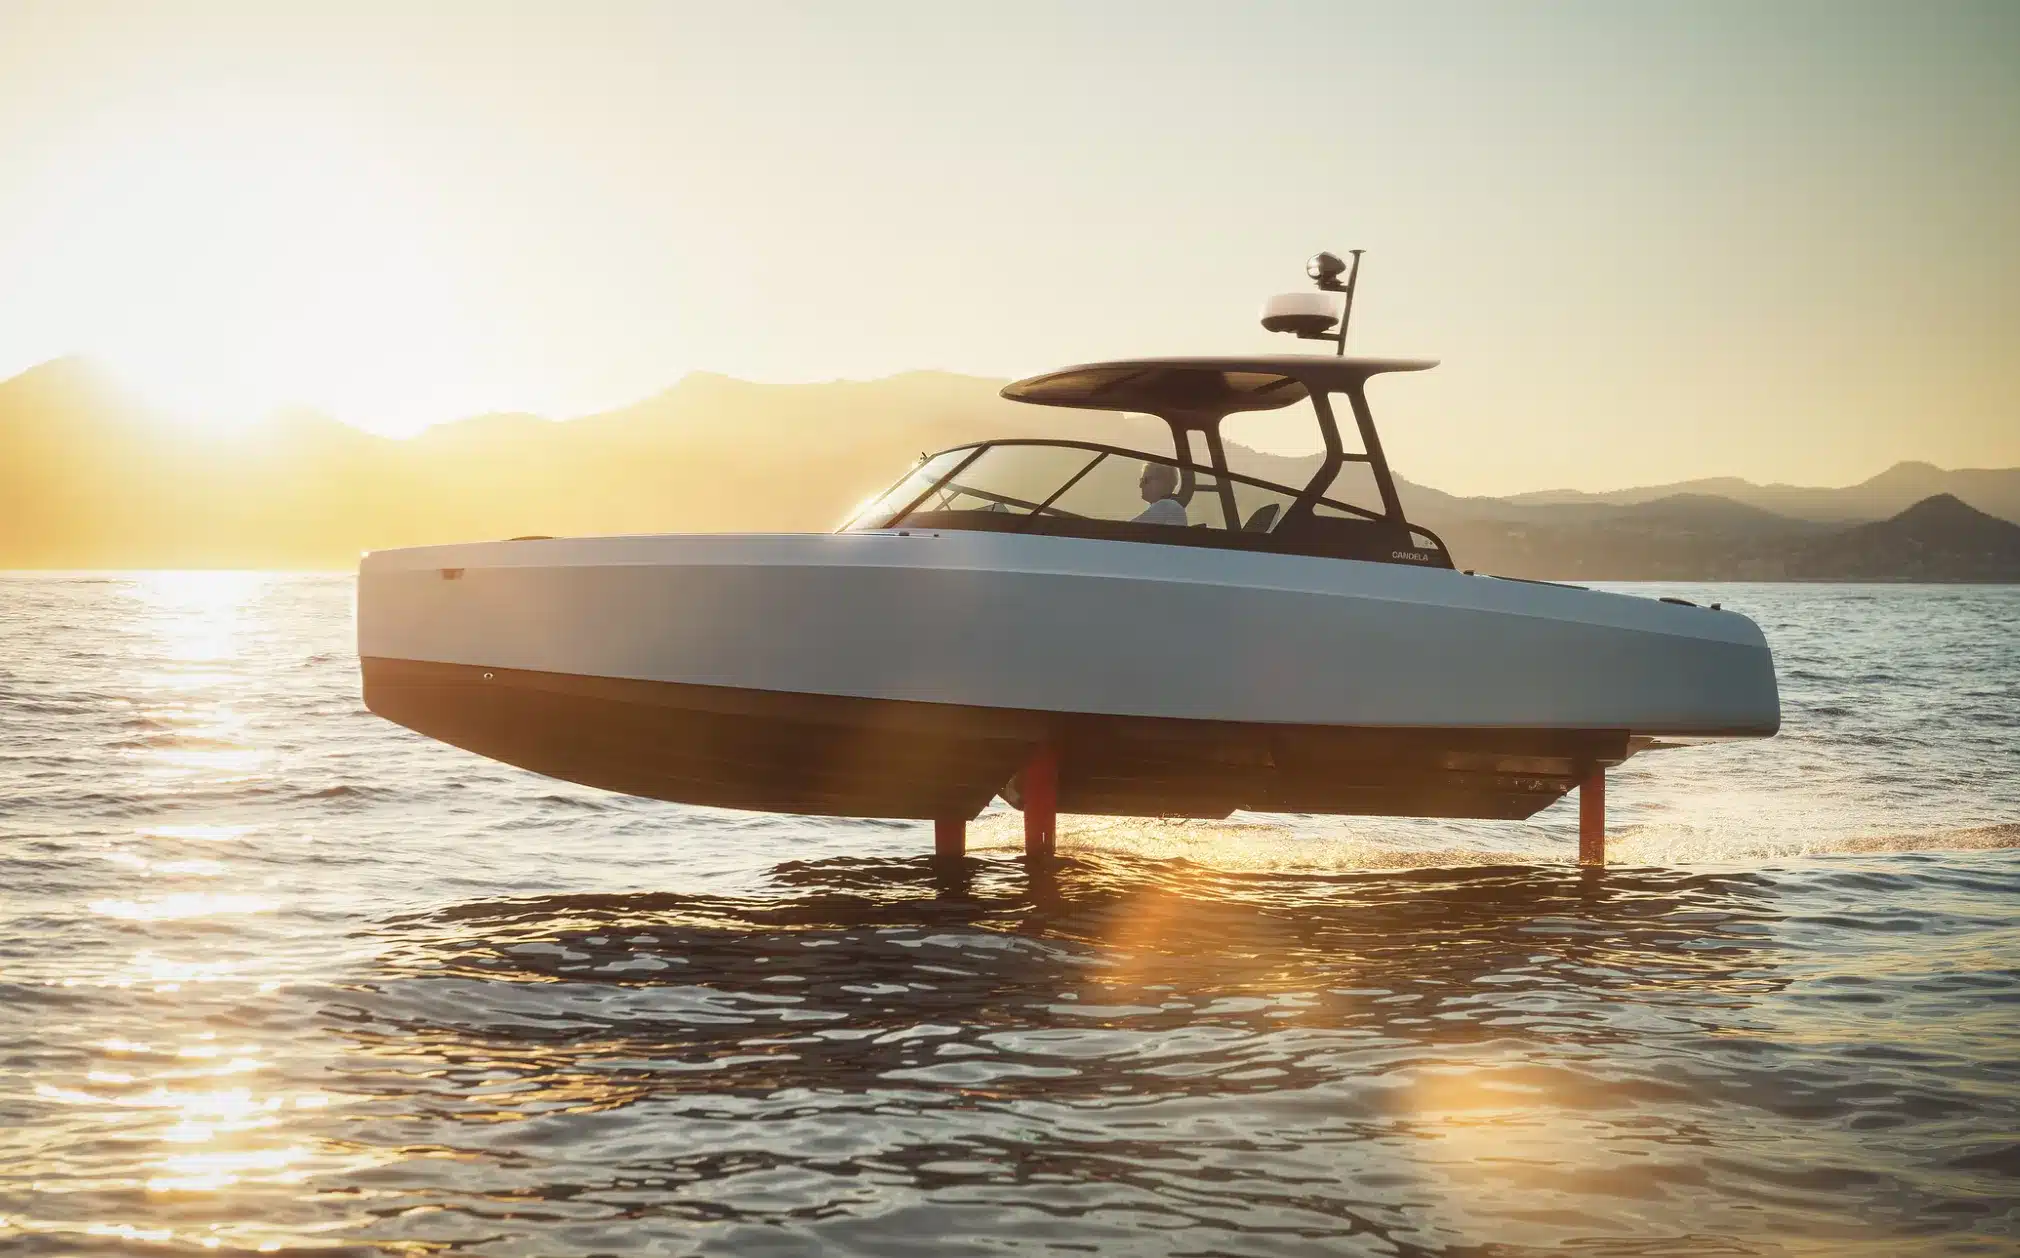 Candela hydrofoiling boat CES 2023